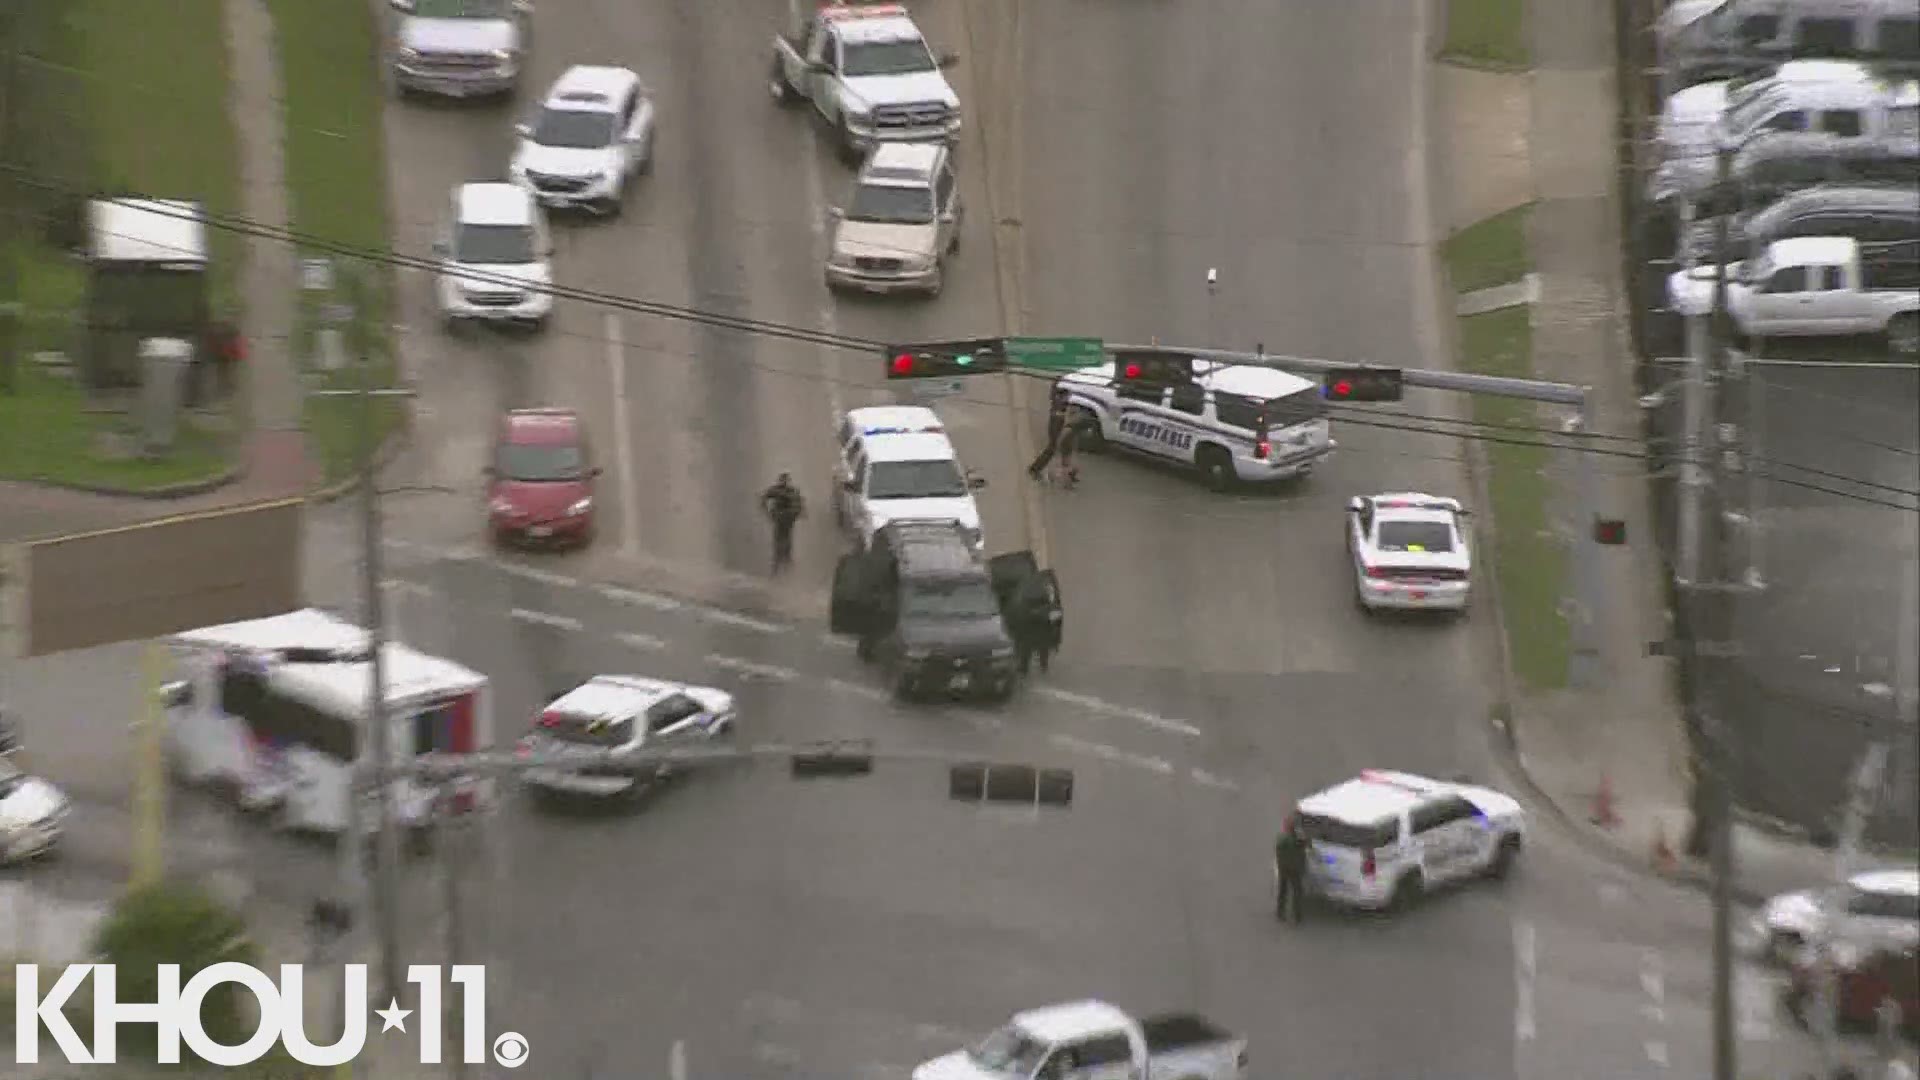 Air 11 flew over the scene of a chase where a woman could be seen being placed in the back of a patrol car.